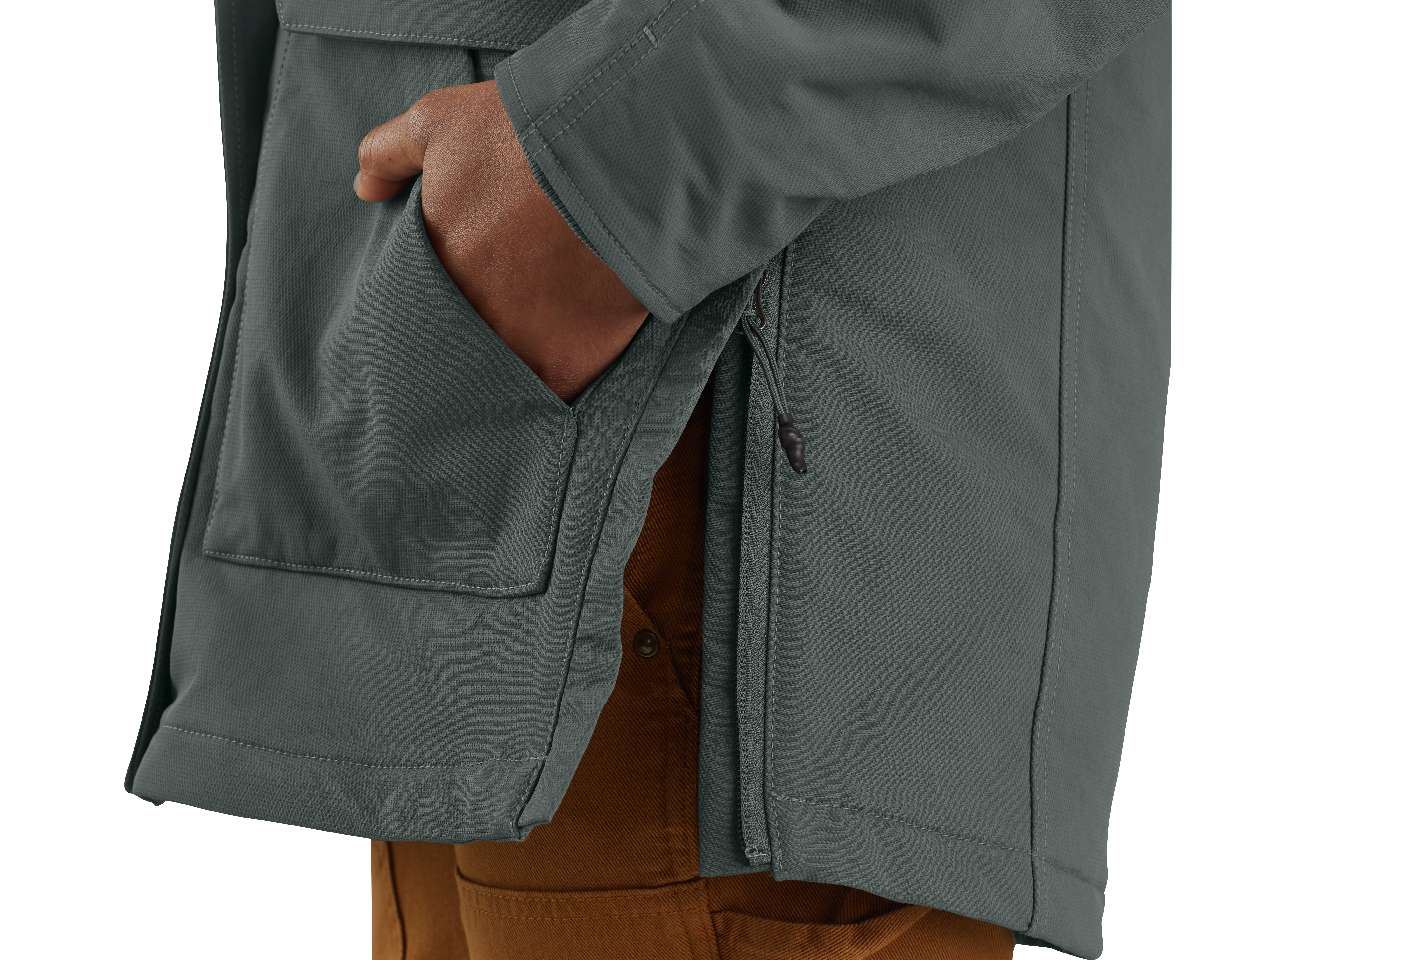 Side hem zippers allow more room to move when you need it